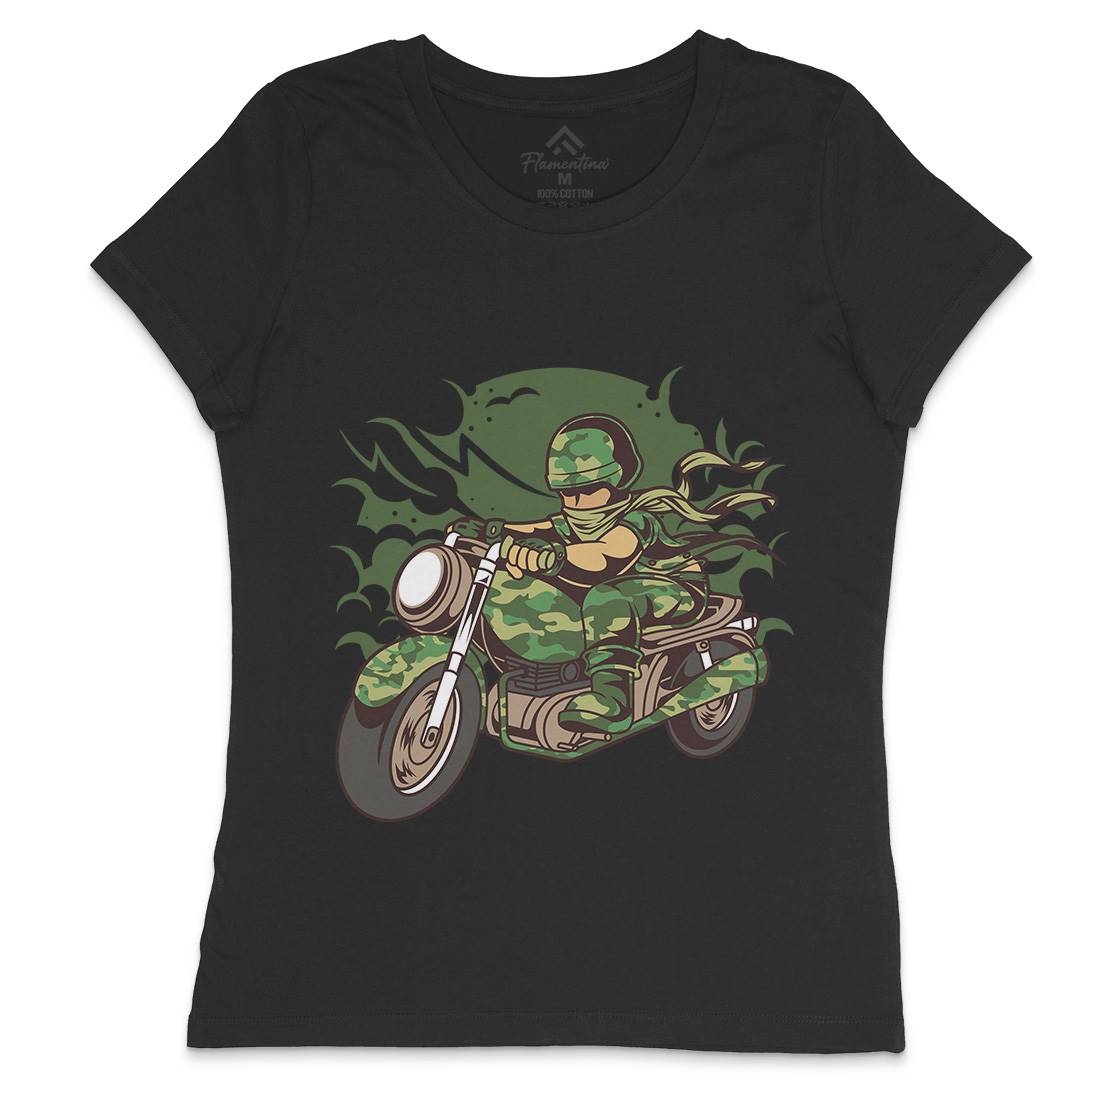 Motorcycle Ride Womens Crew Neck T-Shirt Army C306